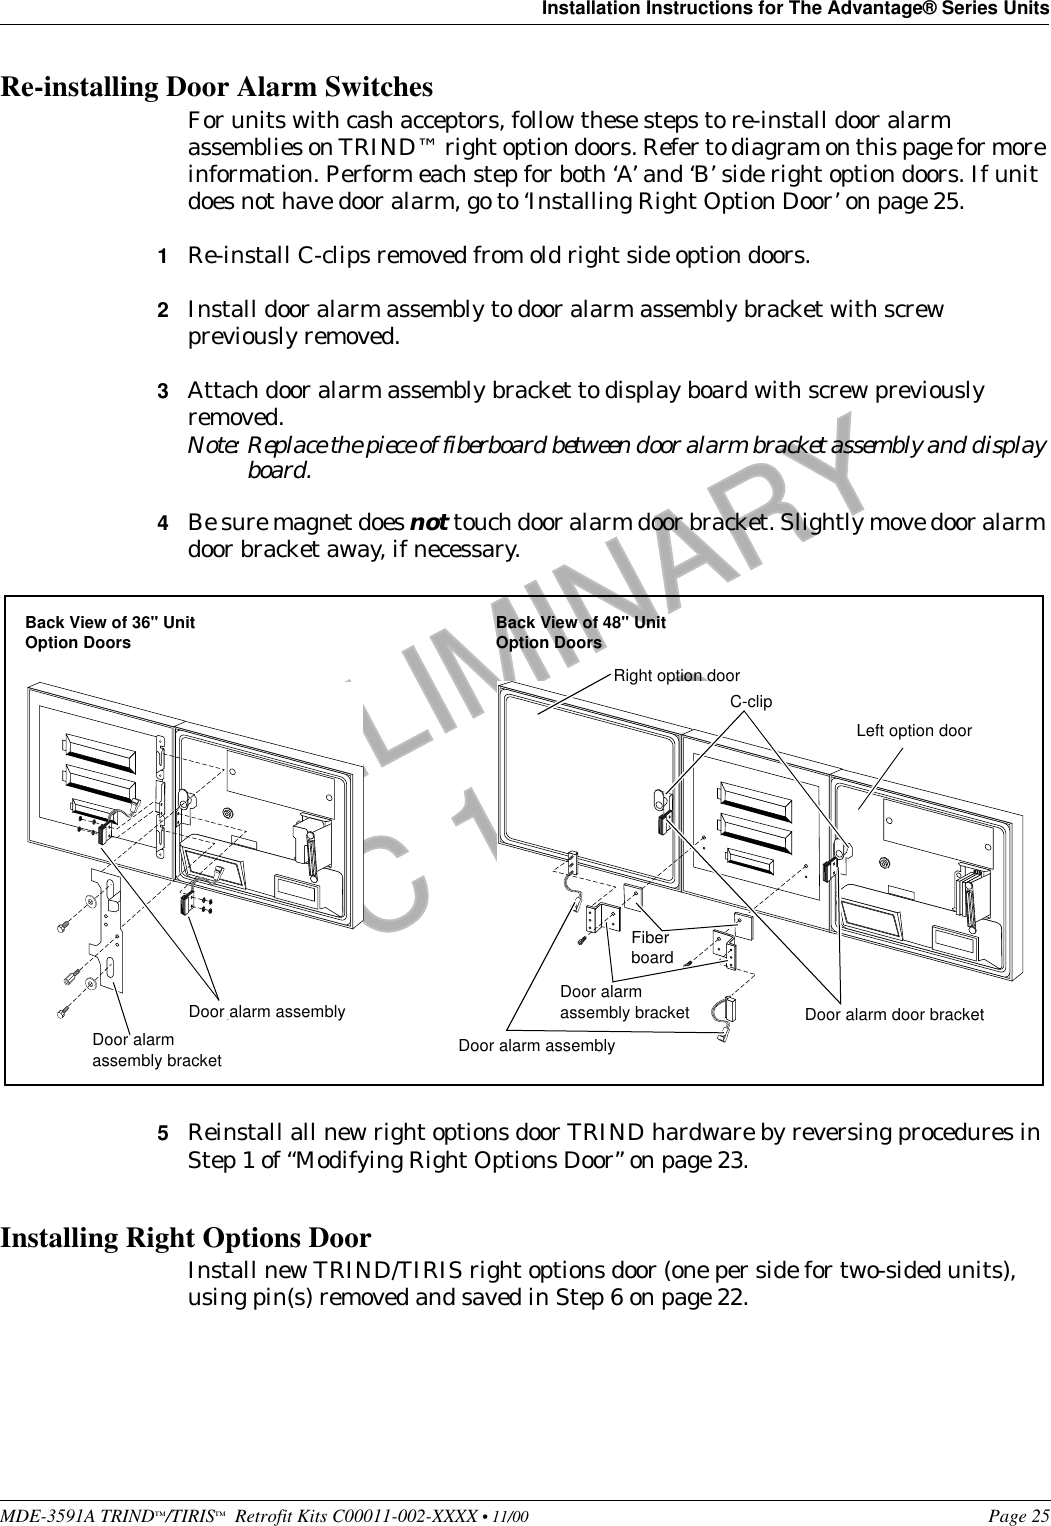 MDE-3591A TRIND™/TIRIS™  Retrofit Kits C00011-002-XXXX • 11/00 Page 25Installation Instructions for The Advantage® Series UnitsPRELIMINARYFCC 11/30Re-installing Door Alarm SwitchesFor units with cash acceptors, follow these steps to re-install door alarm assemblies on TRIND™ right option doors. Refer to diagram on this page for more information. Perform each step for both ‘A’ and ‘B’ side right option doors. If unit does not have door alarm, go to ‘Installing Right Option Door’ on page 25.1Re-install C-clips removed from old right side option doors.2Install door alarm assembly to door alarm assembly bracket with screw previously removed.3Attach door alarm assembly bracket to display board with screw previously removed.Note: Replace the piece of fiberboard between door alarm bracket assembly and display board.4Be sure magnet does not touch door alarm door bracket. Slightly move door alarm door bracket away, if necessary.5Reinstall all new right options door TRIND hardware by reversing procedures in Step 1 of “Modifying Right Options Door” on page 23.Installing Right Options DoorInstall new TRIND/TIRIS right options door (one per side for two-sided units), using pin(s) removed and saved in Step 6 on page 22.Left option doorRight option doorDoor alarm assemblyFiber boardDoor alarm assembly bracketC-clipDoor alarm door bracketDoor alarm assemblyDoor alarm assembly bracketBack View of 36&quot; Unit Option Doors Back View of 48&quot; Unit Option Doors